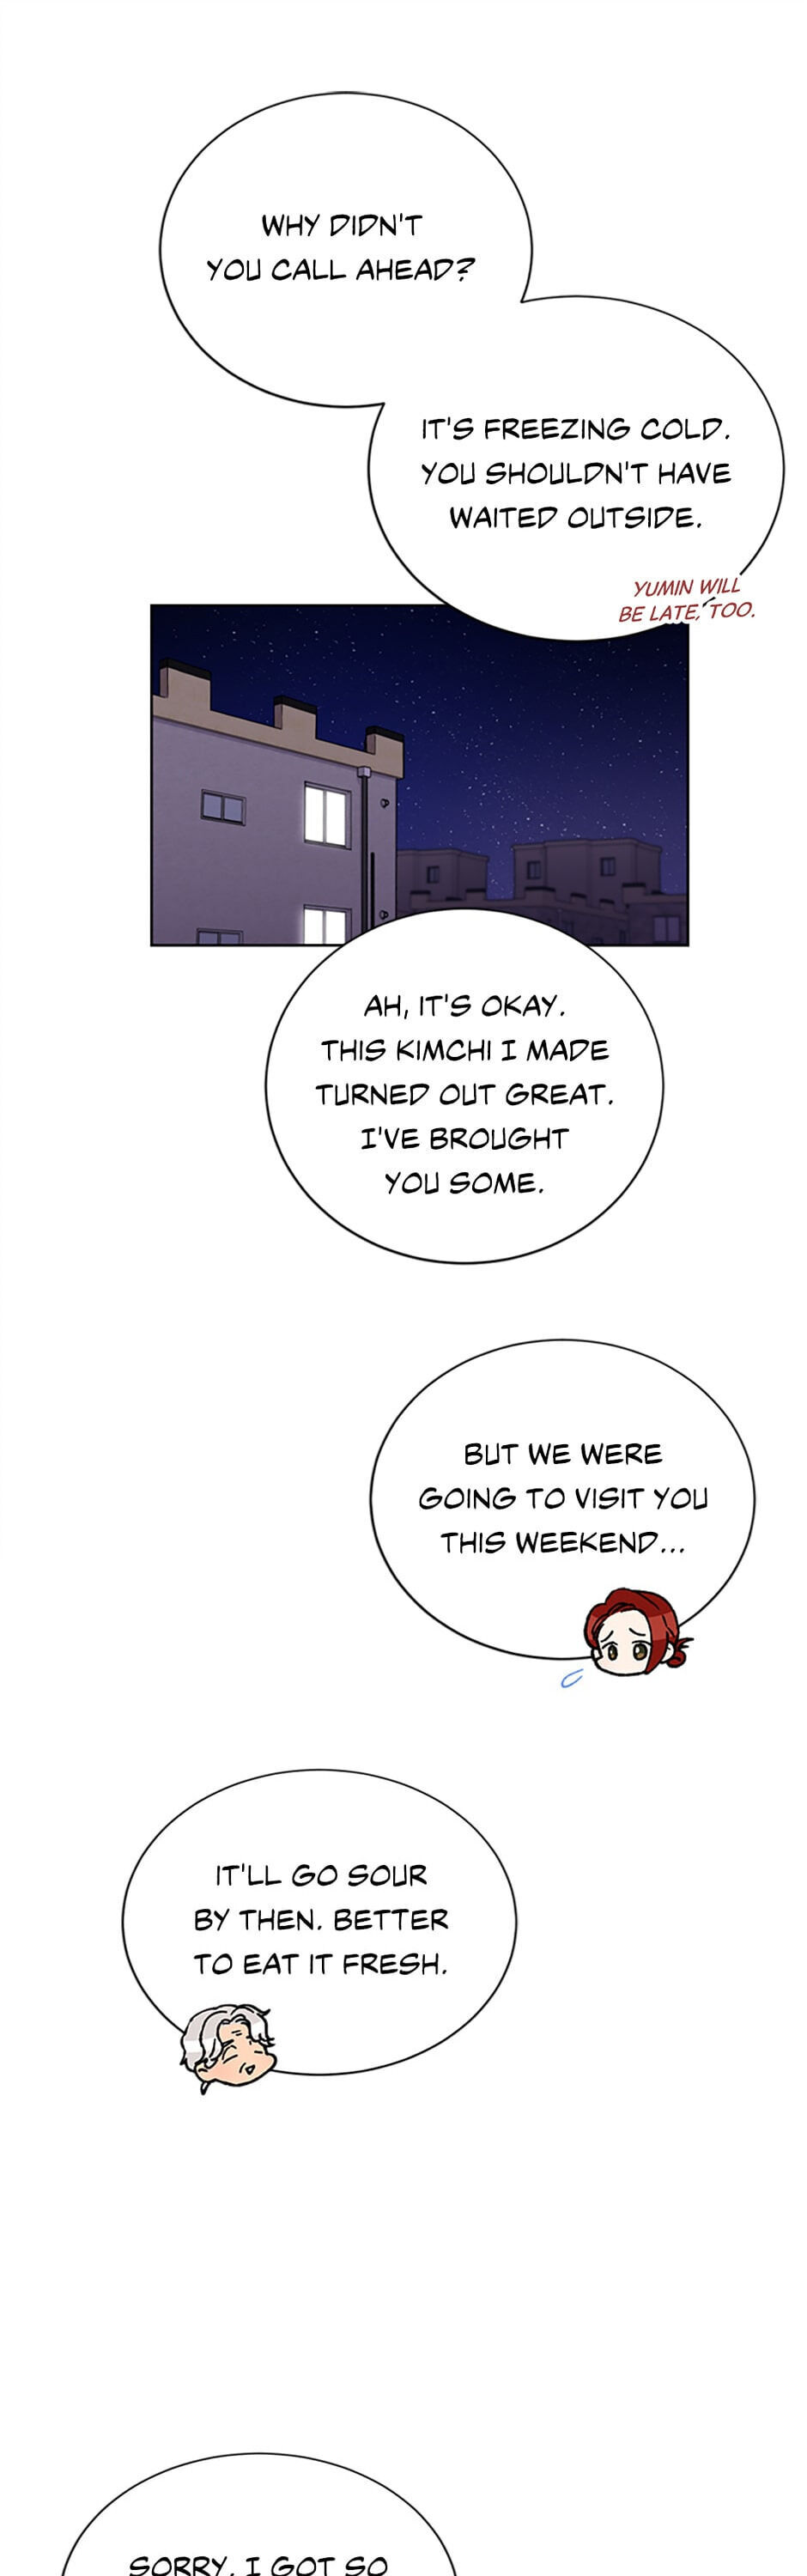 Acquainted: Encounter Spin-Off - Page 2